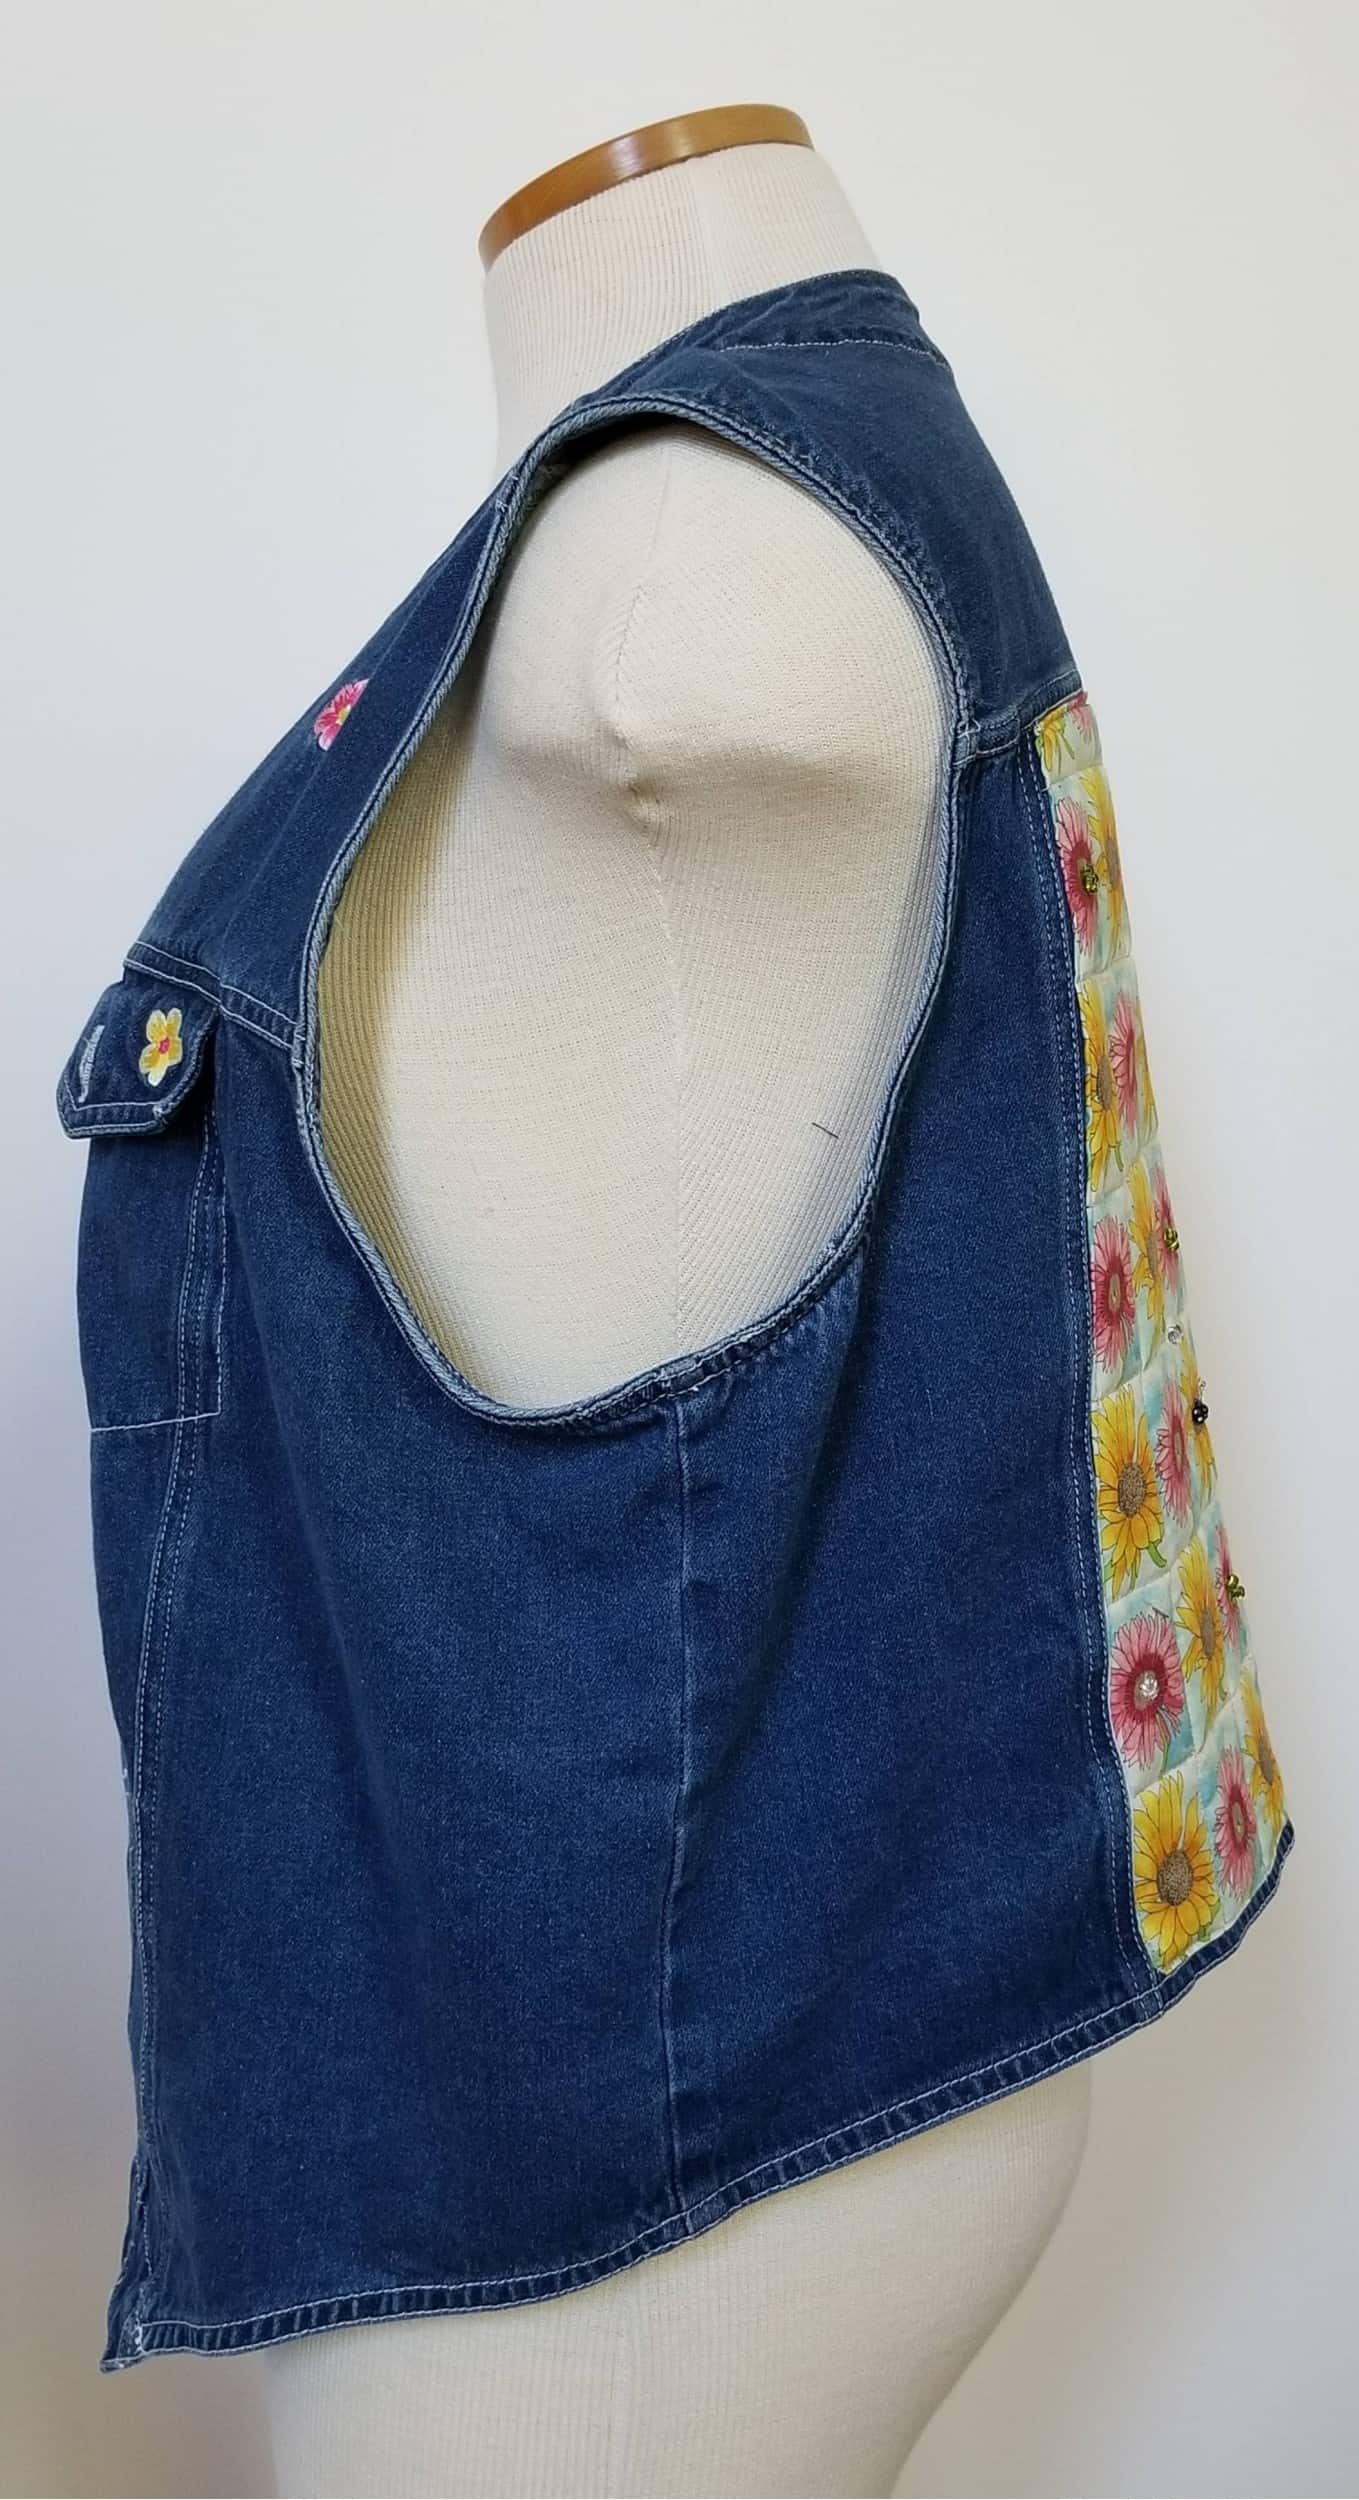 This Quilted and Beaded Jean Vest/Top with Daisies, BOHO Upcycled vest, Women's XXL is made with love by The Creative Soul Sisters! Shop more unique gift ideas today with Spots Initiatives, the best way to support creators.